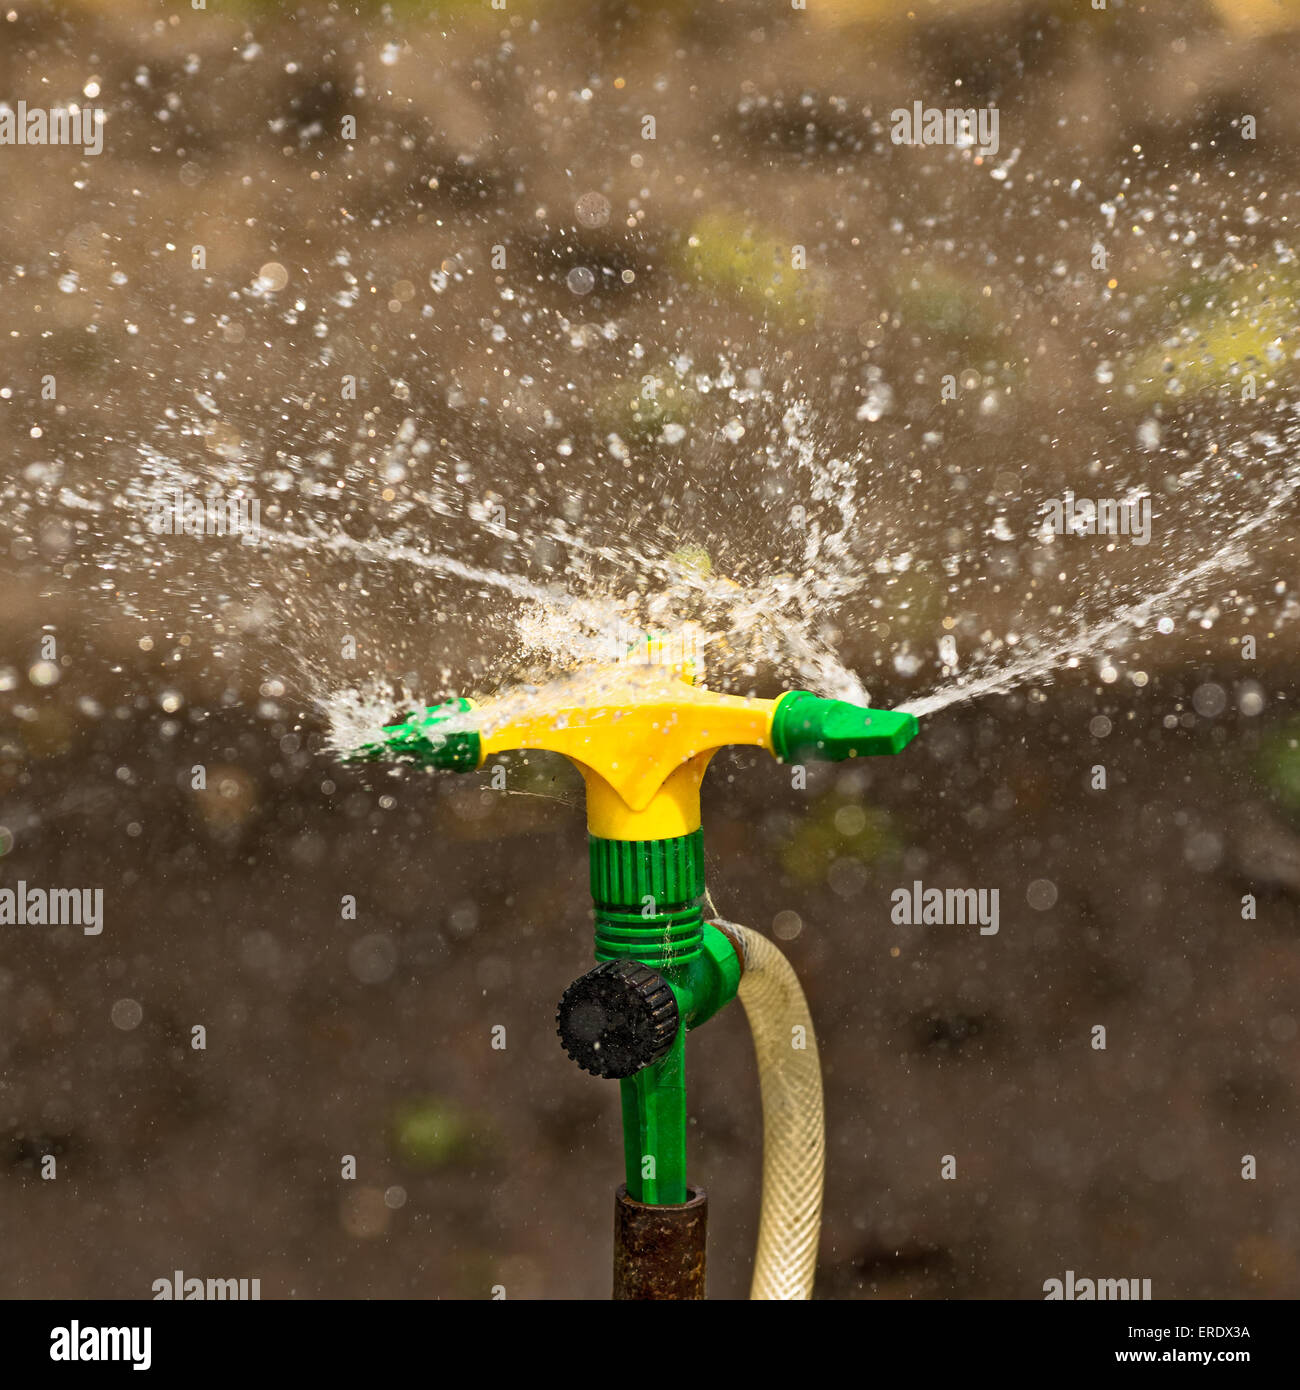 Plastic Home Gardening Irrigation Sprinkler in Operation on Cultivated Agricultural Garden Stock Photo